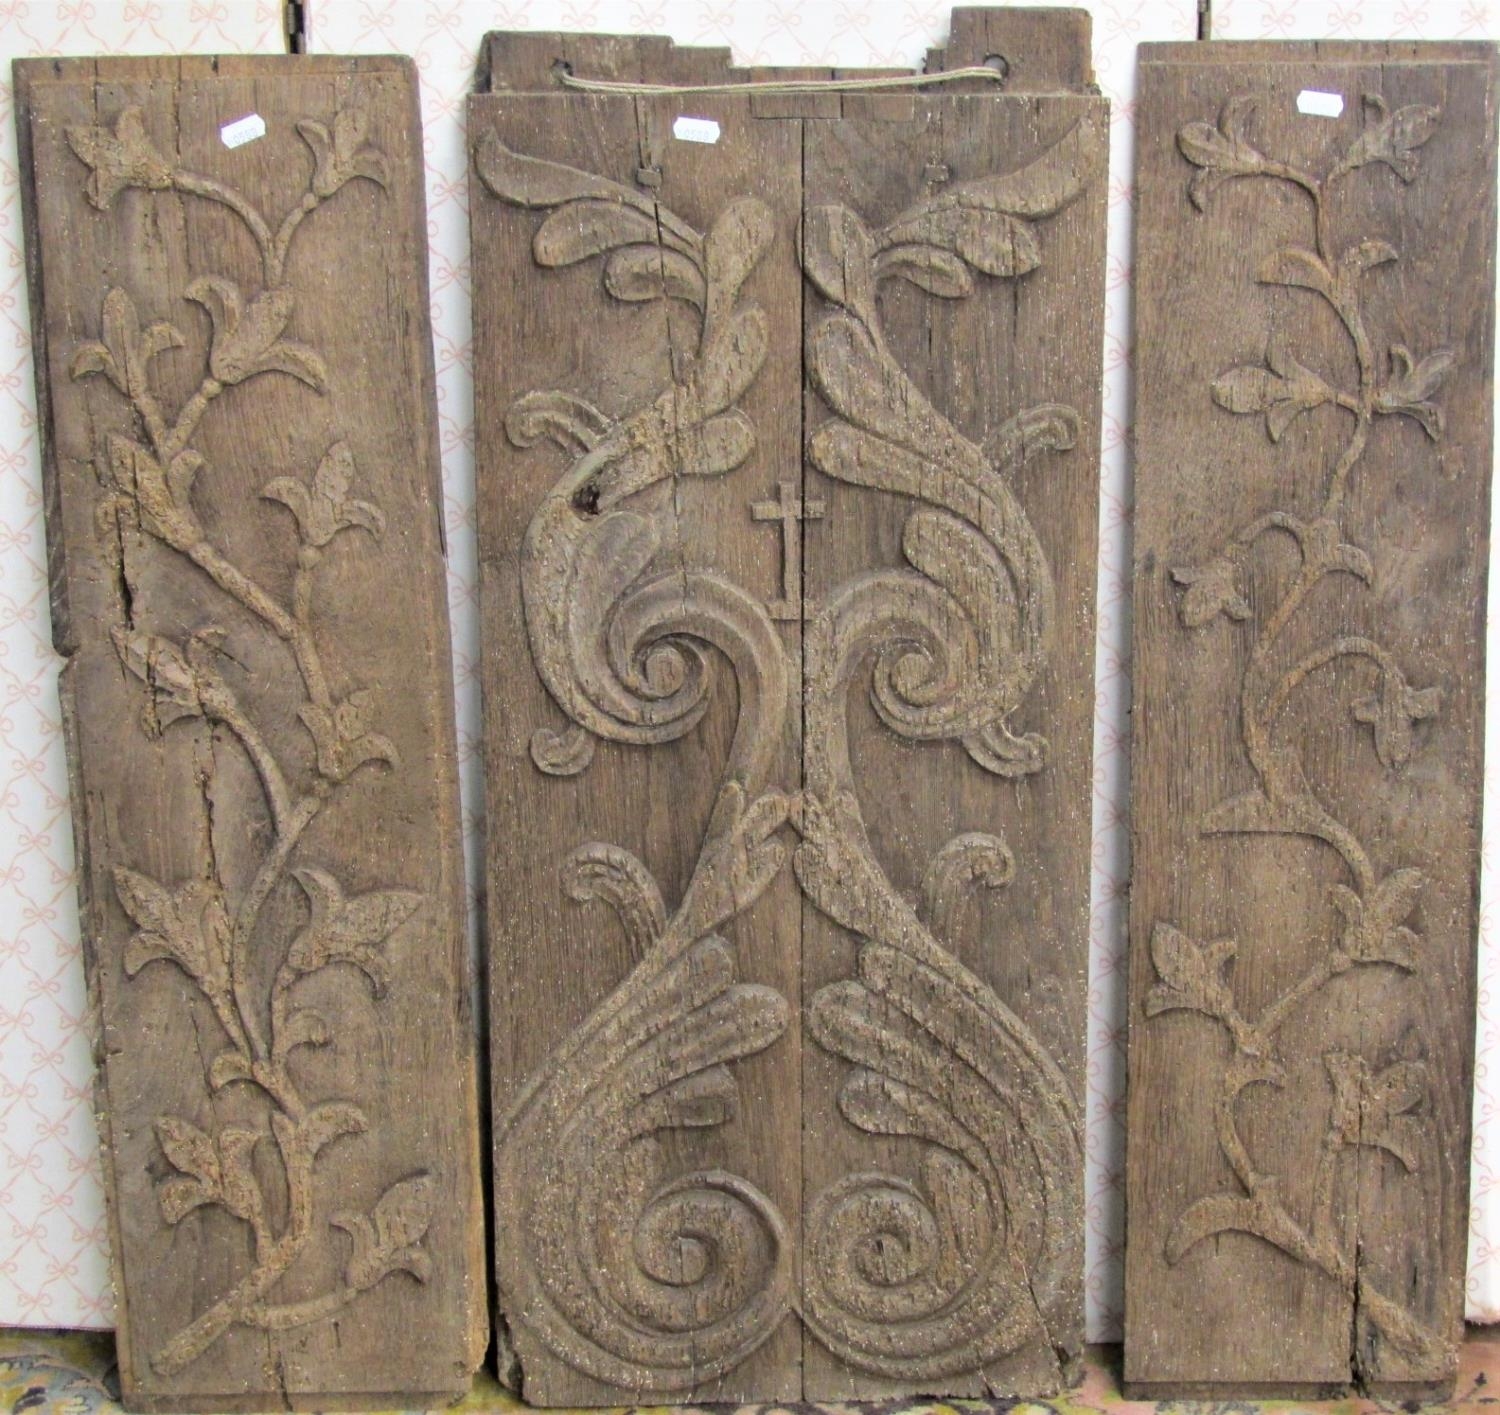 Three 18th century scumbled oak panels with trailing floral detail